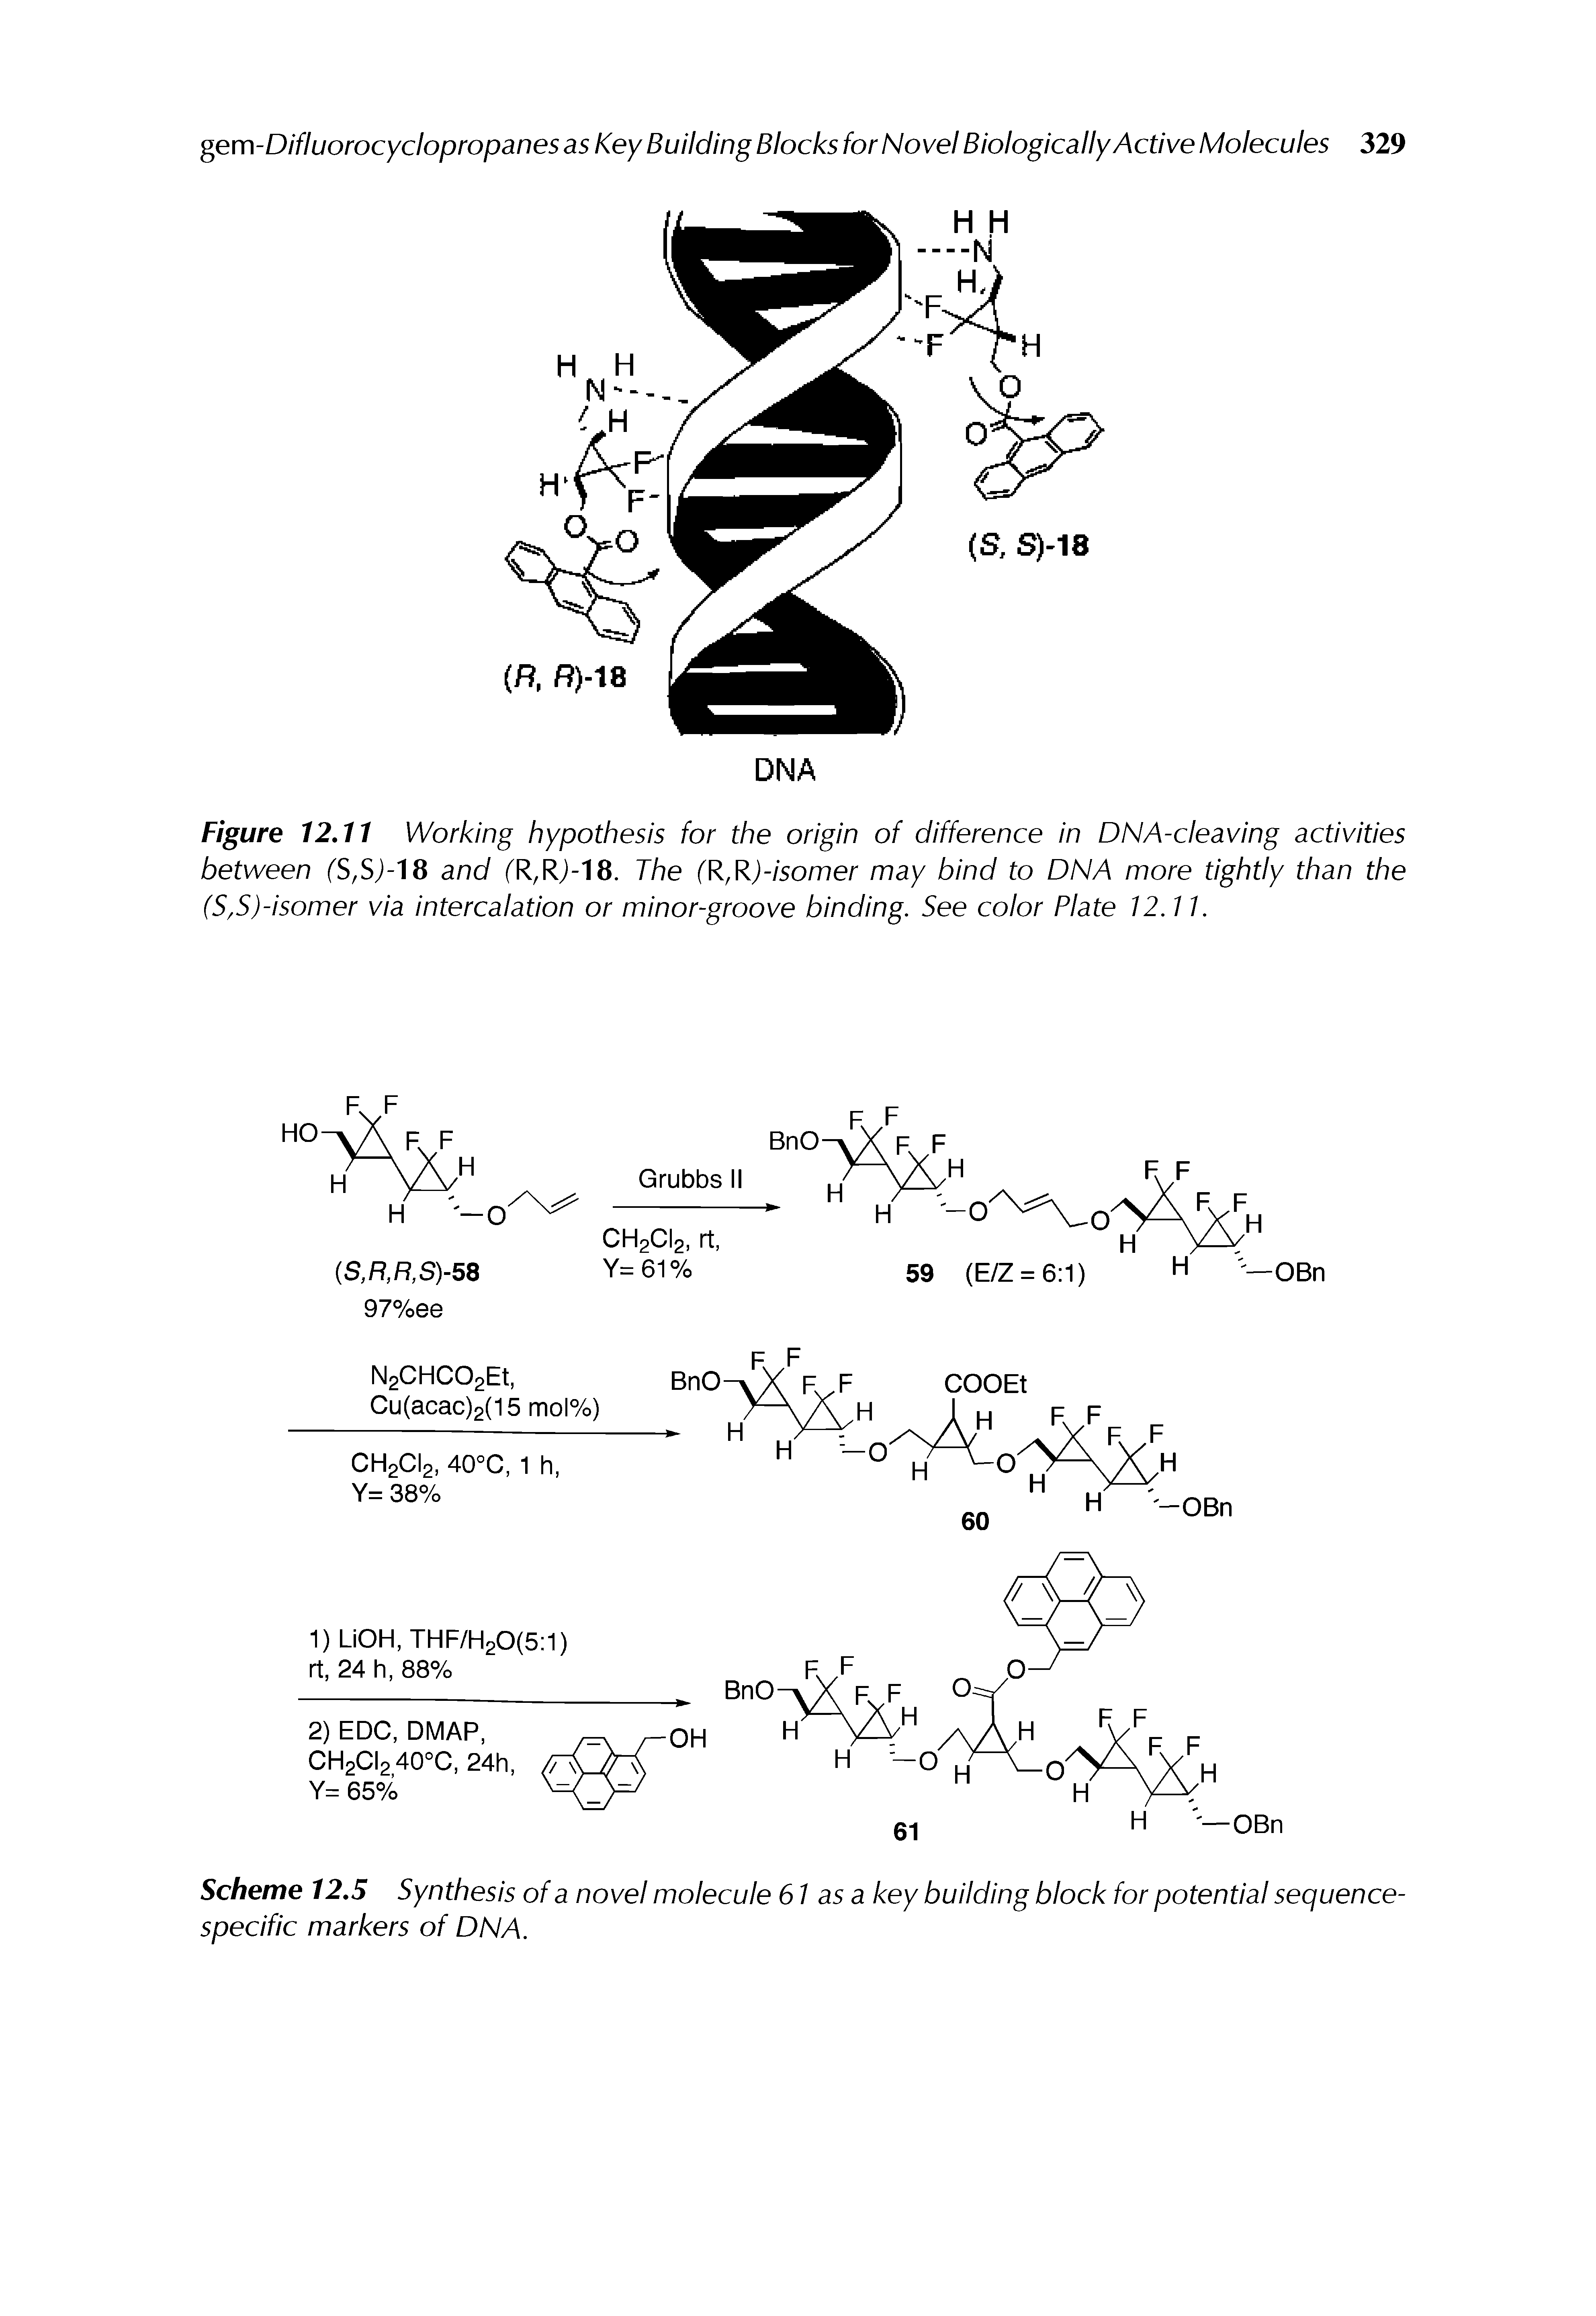 Scheme 12,5 Synthesis of a novel molecule 61 as a key building block for potential sequence-specific markers of DNA.